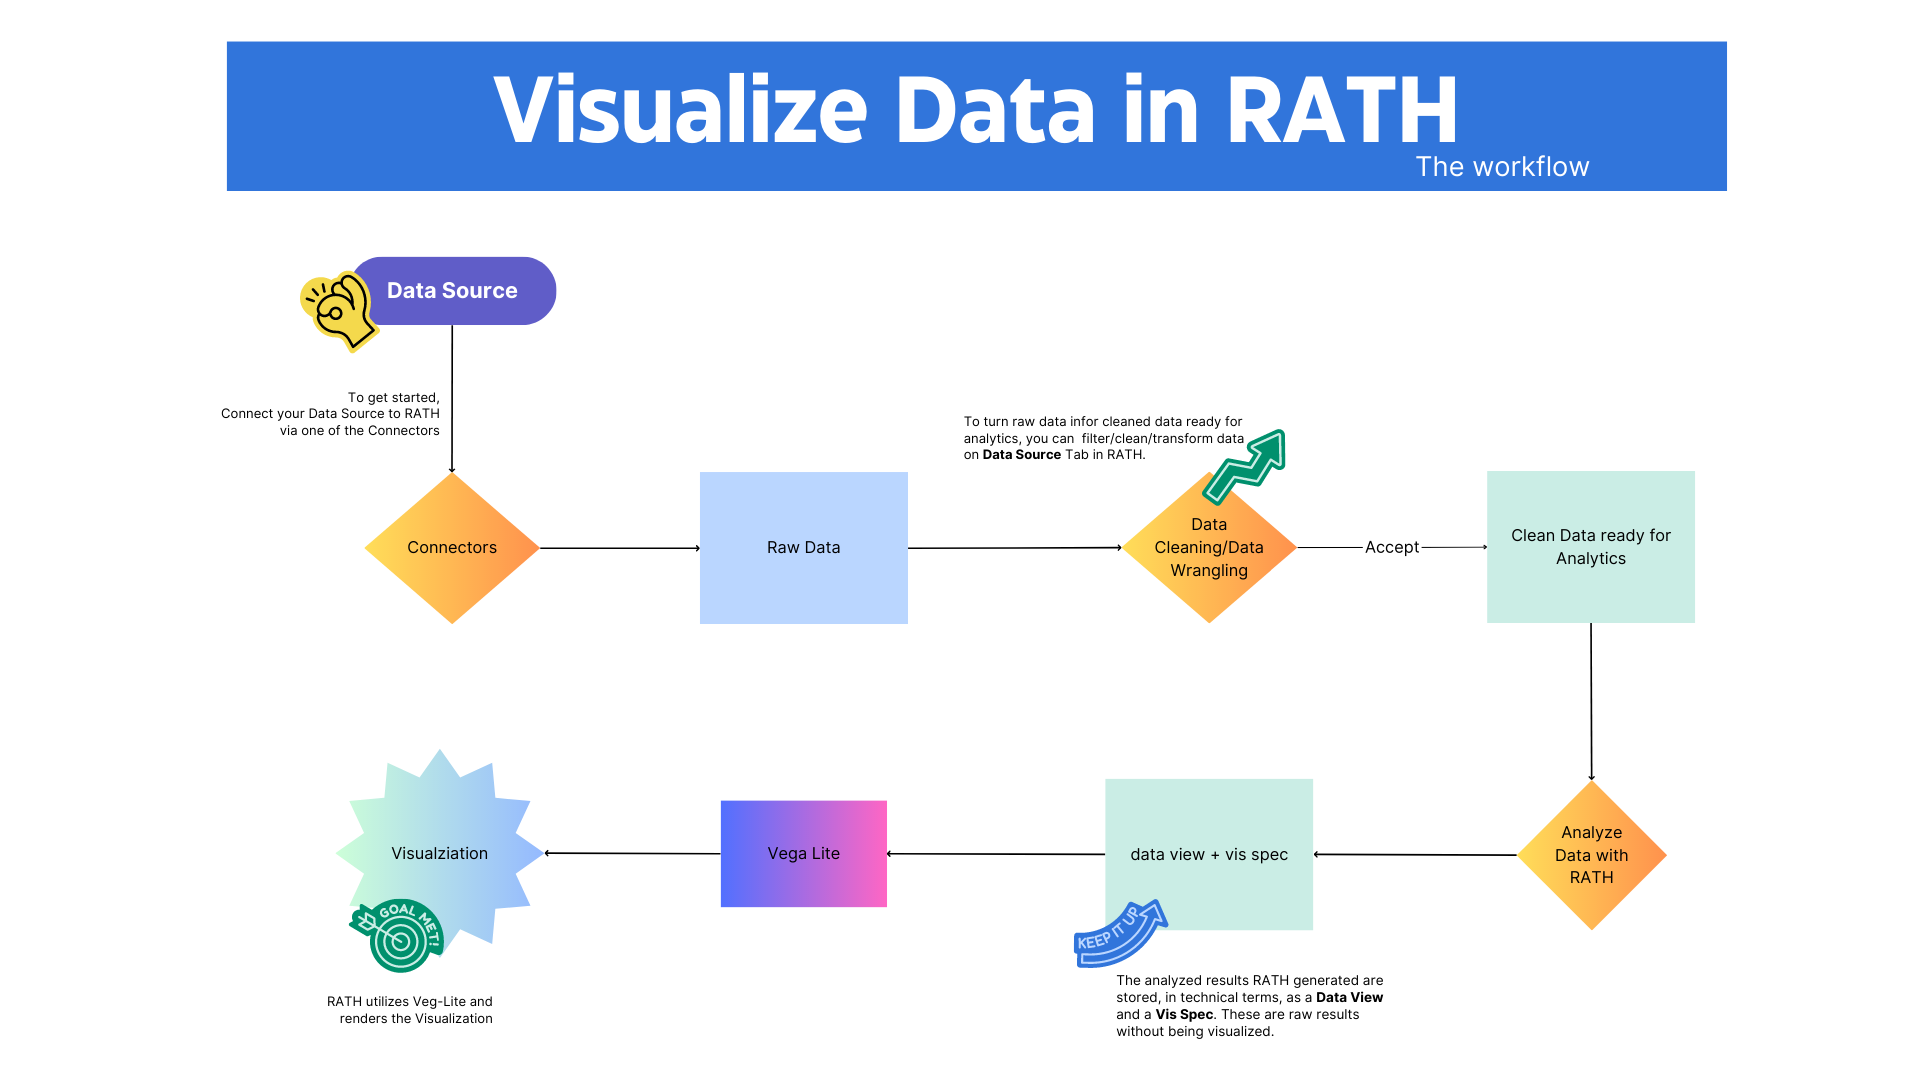 How RATH Visualize Data